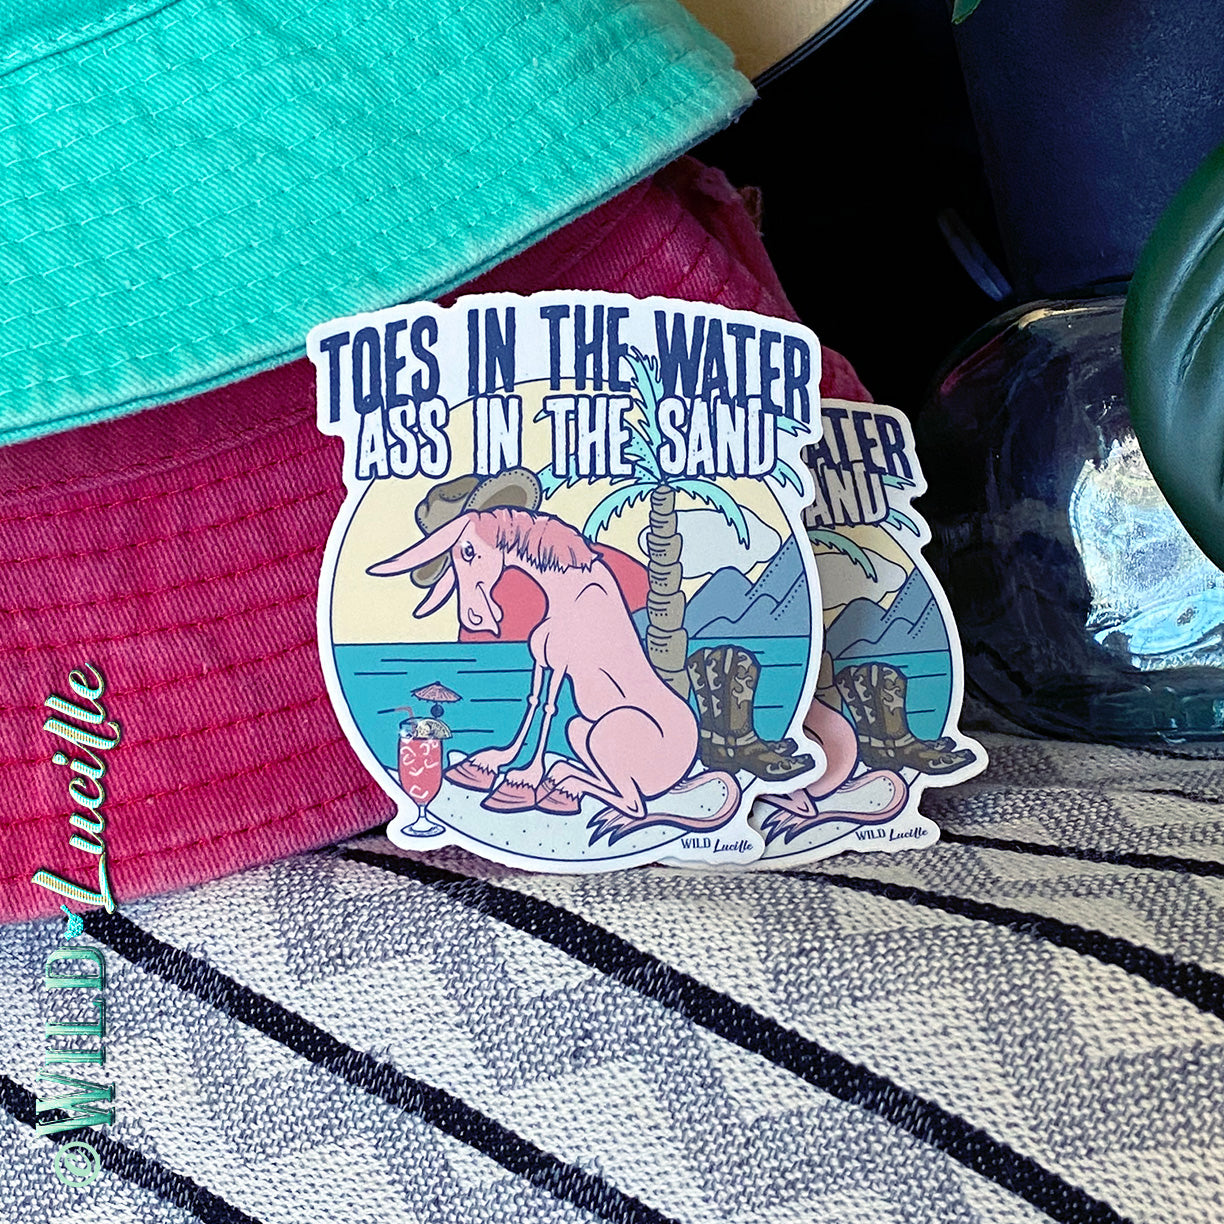 Toes In The Water Ass In The Sand - Vinyl Sticker Decals